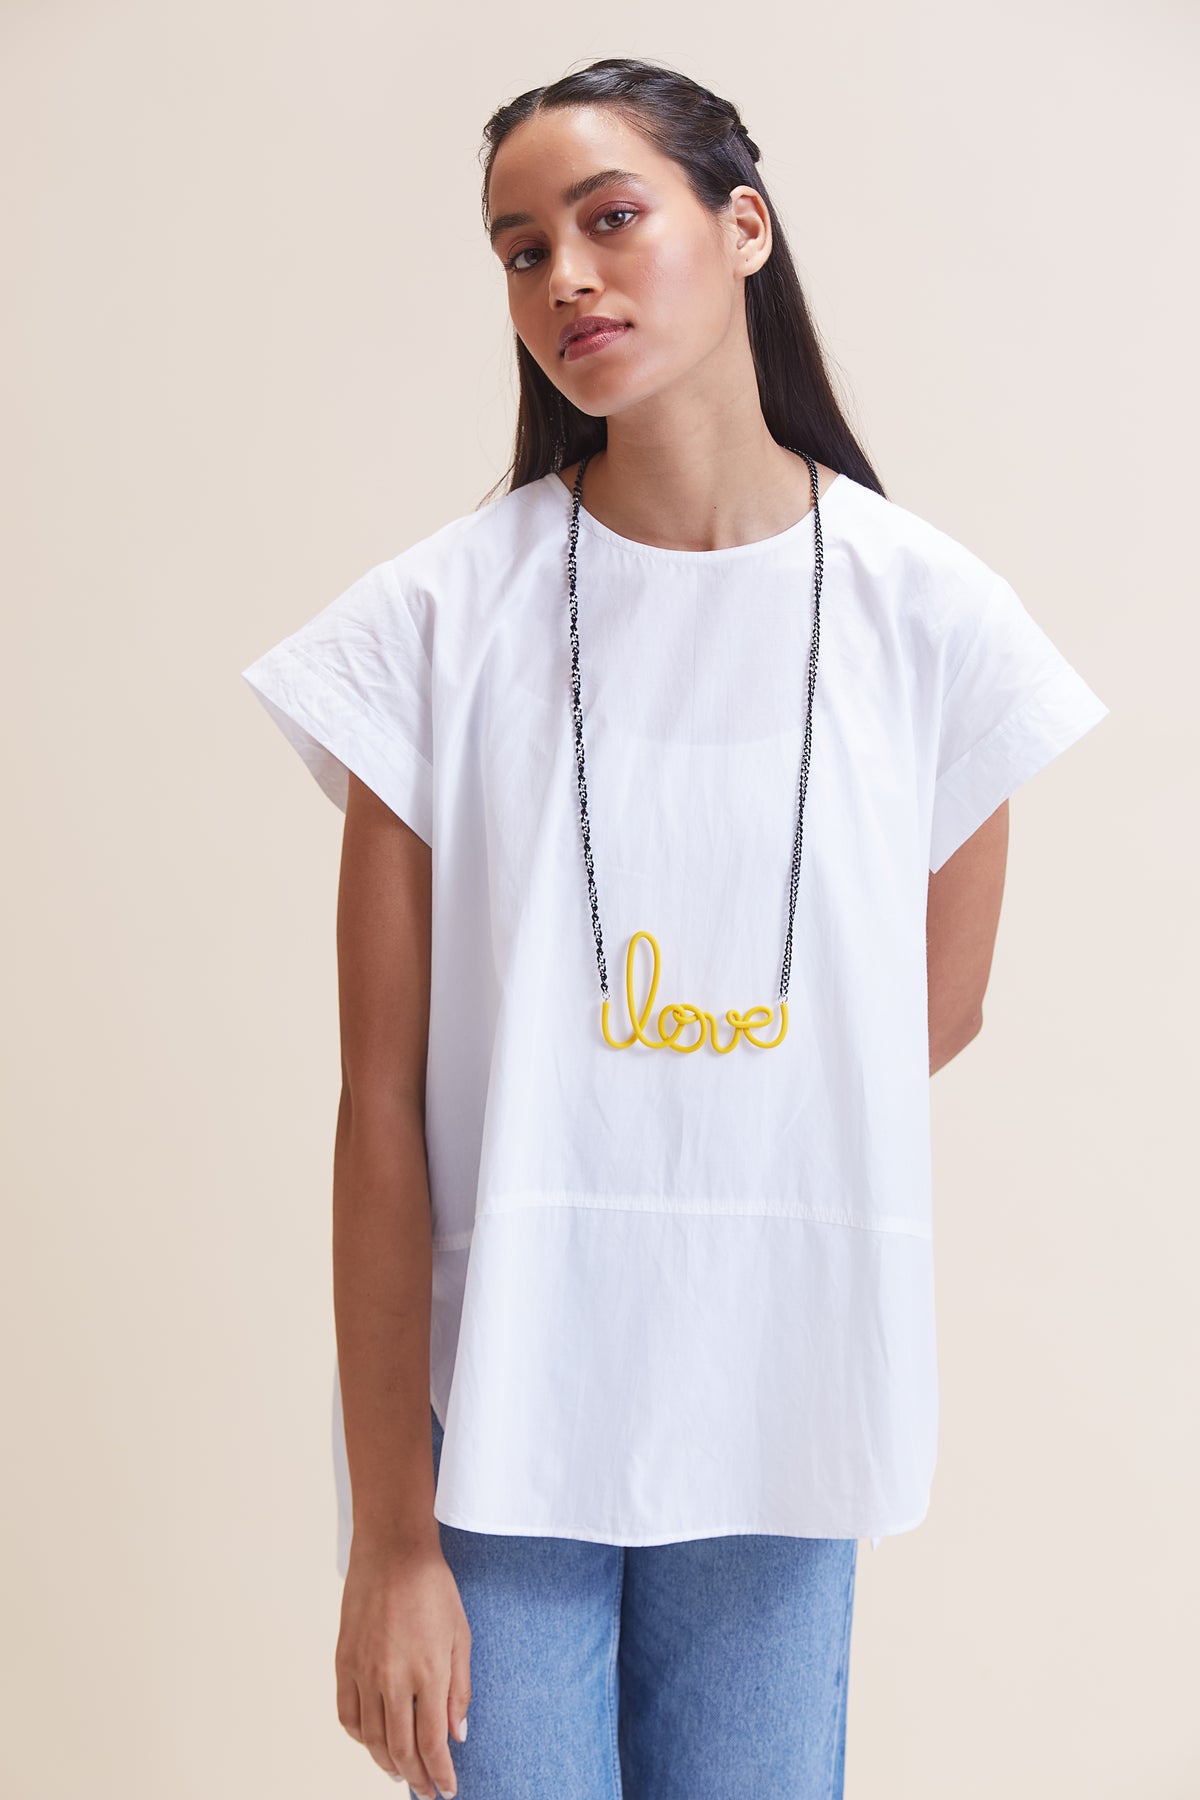 Love Necklace - Long - Yellow